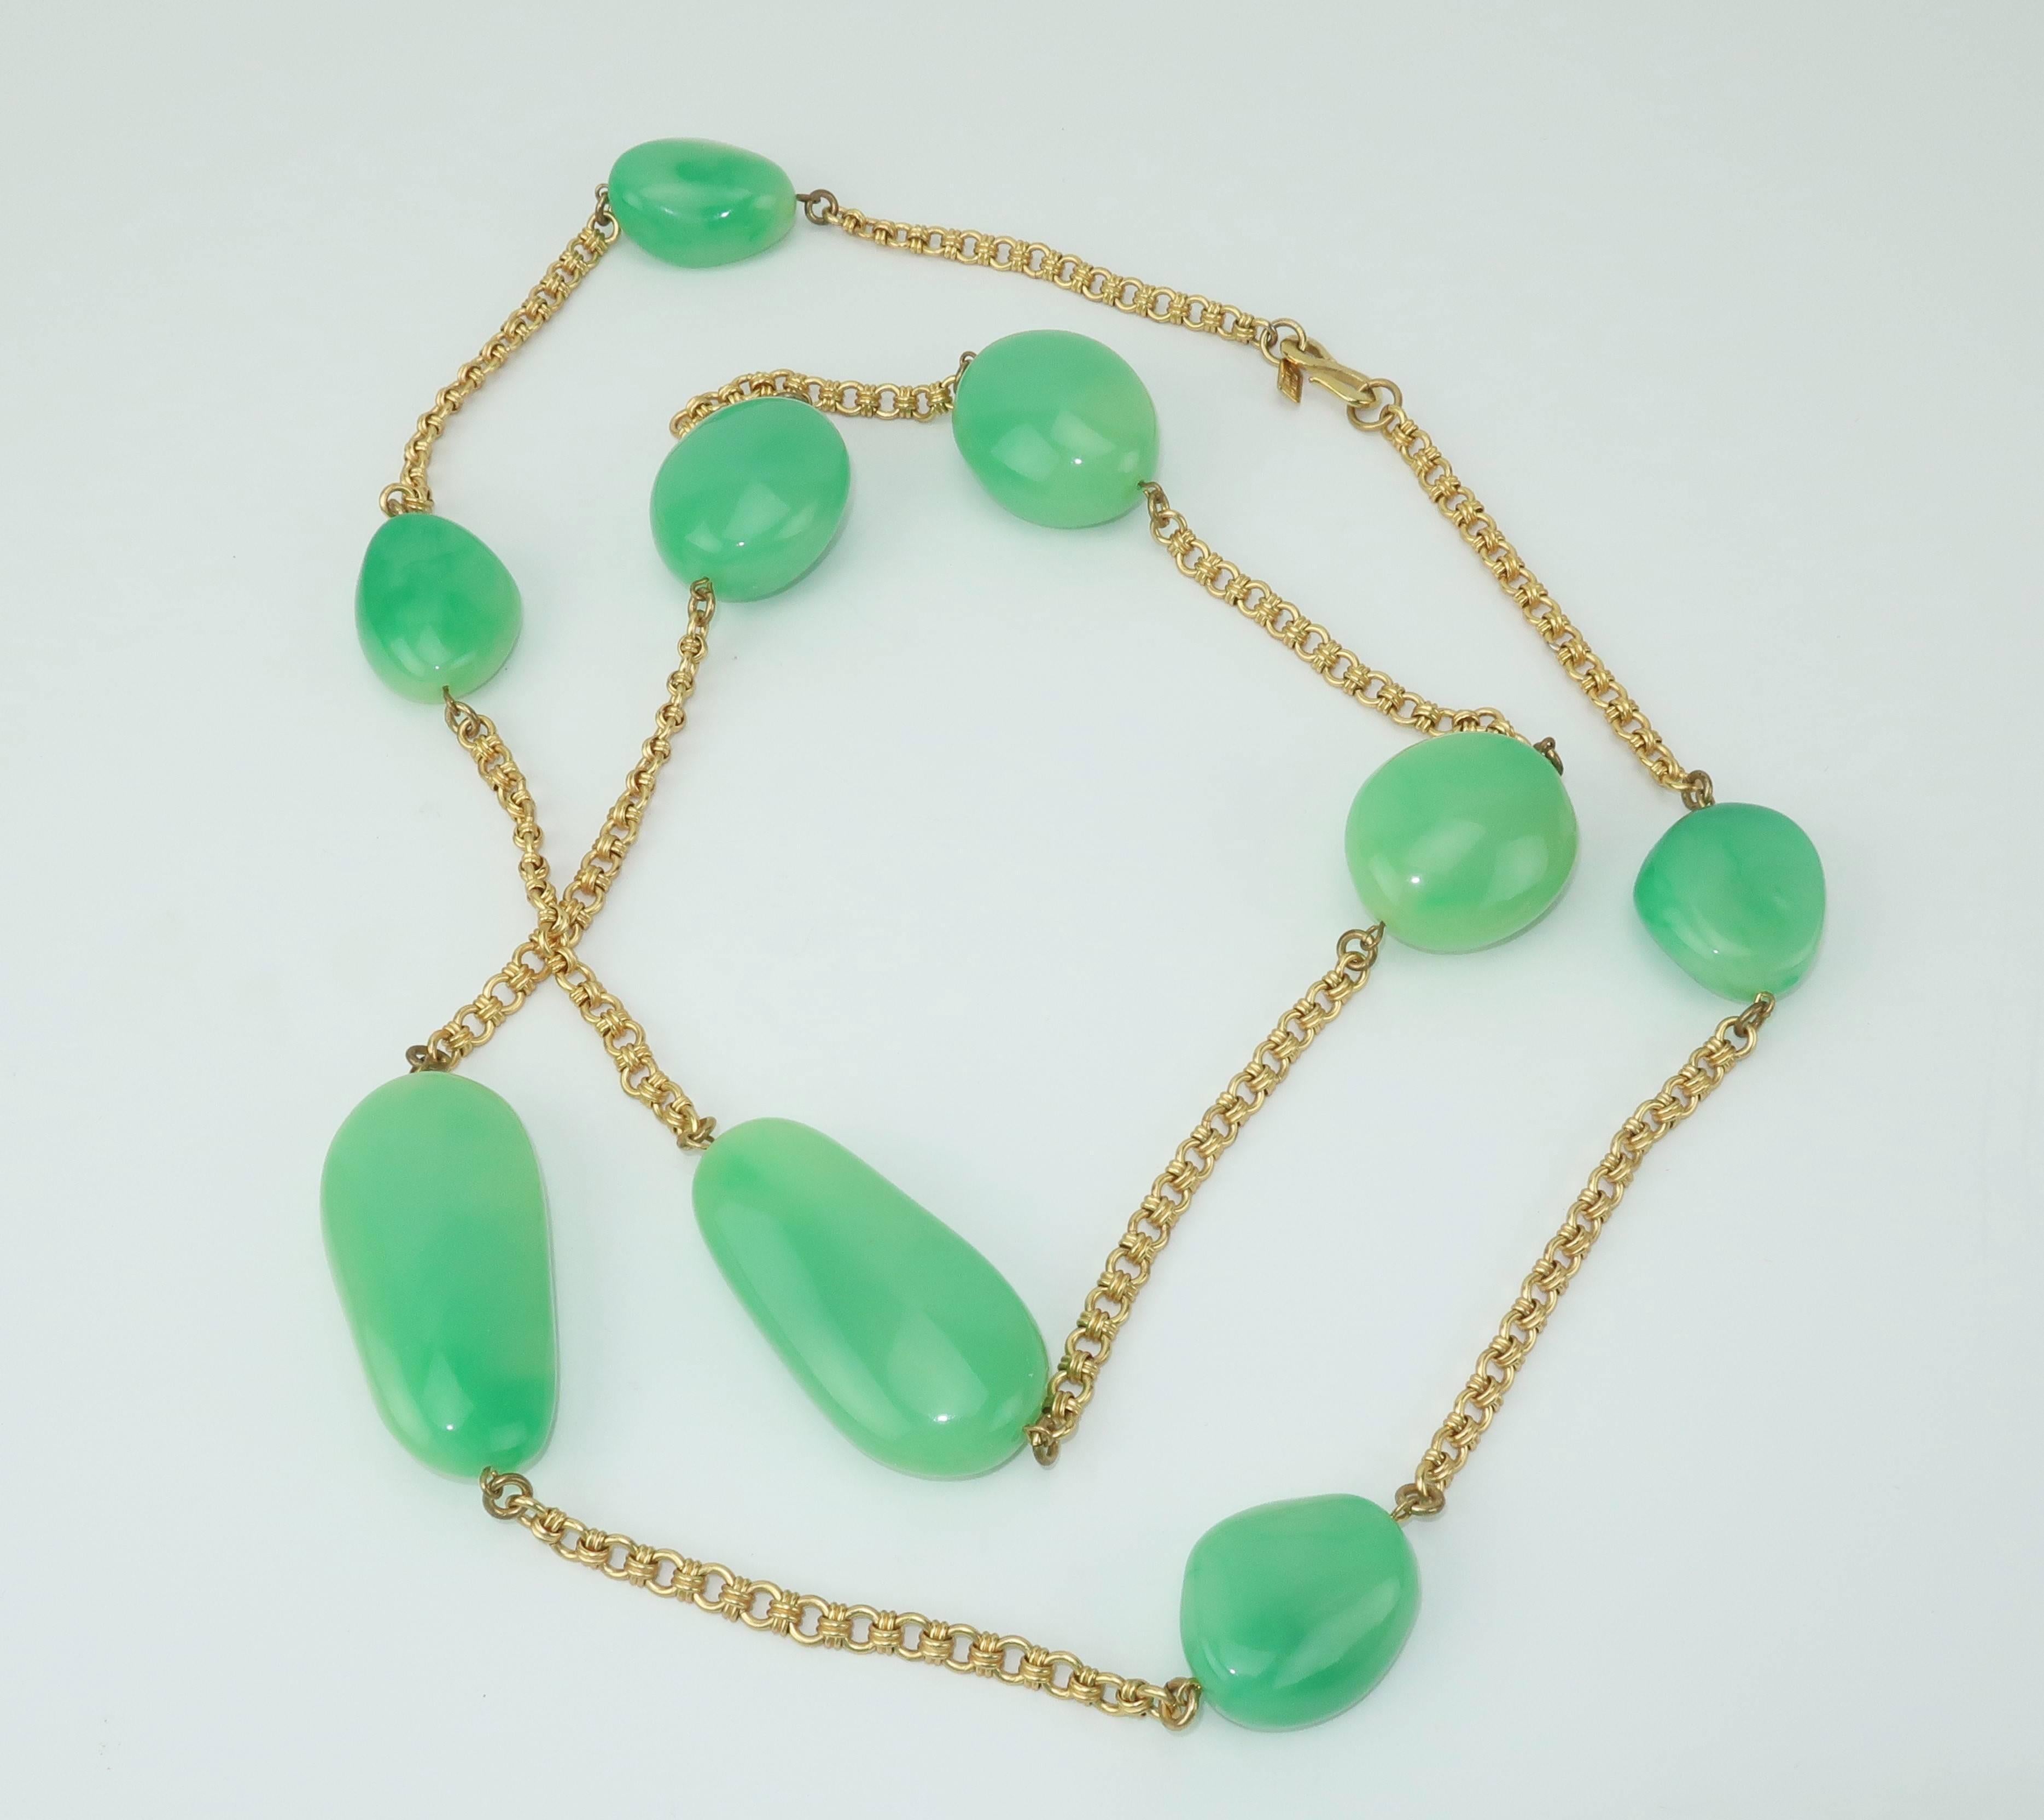 Vintage Kenneth Jay Lane Faux Jade Opera Length Gold Chain Necklace 1